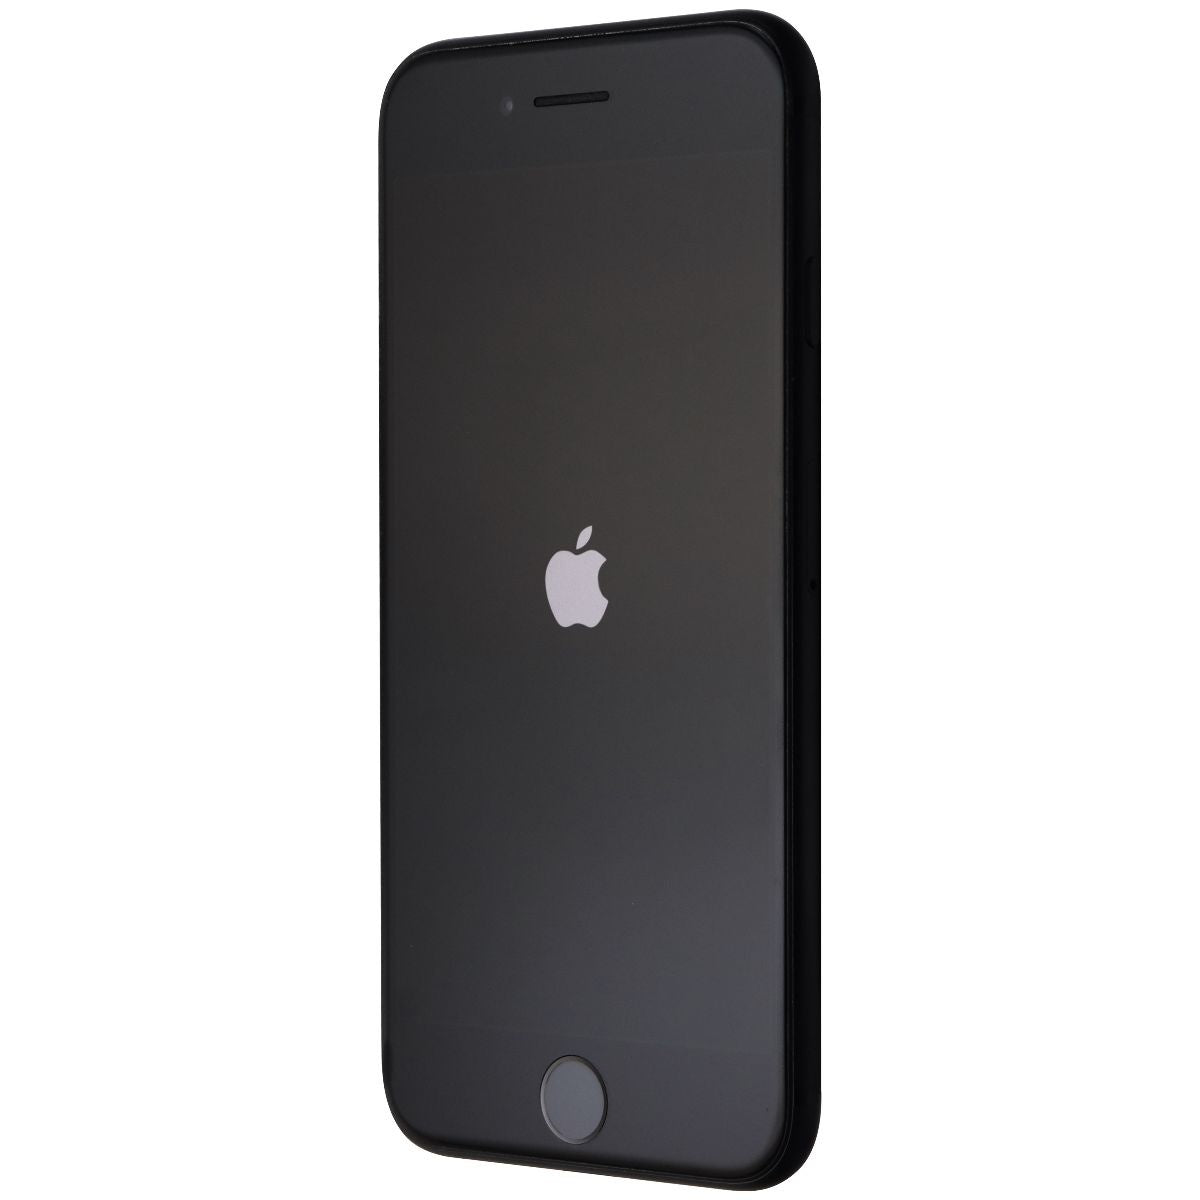 Apple iPhone 7 (4.7-inch) Smartphone (A1660) Unlocked - 32GB / Black Cell Phones & Smartphones Apple    - Simple Cell Bulk Wholesale Pricing - USA Seller